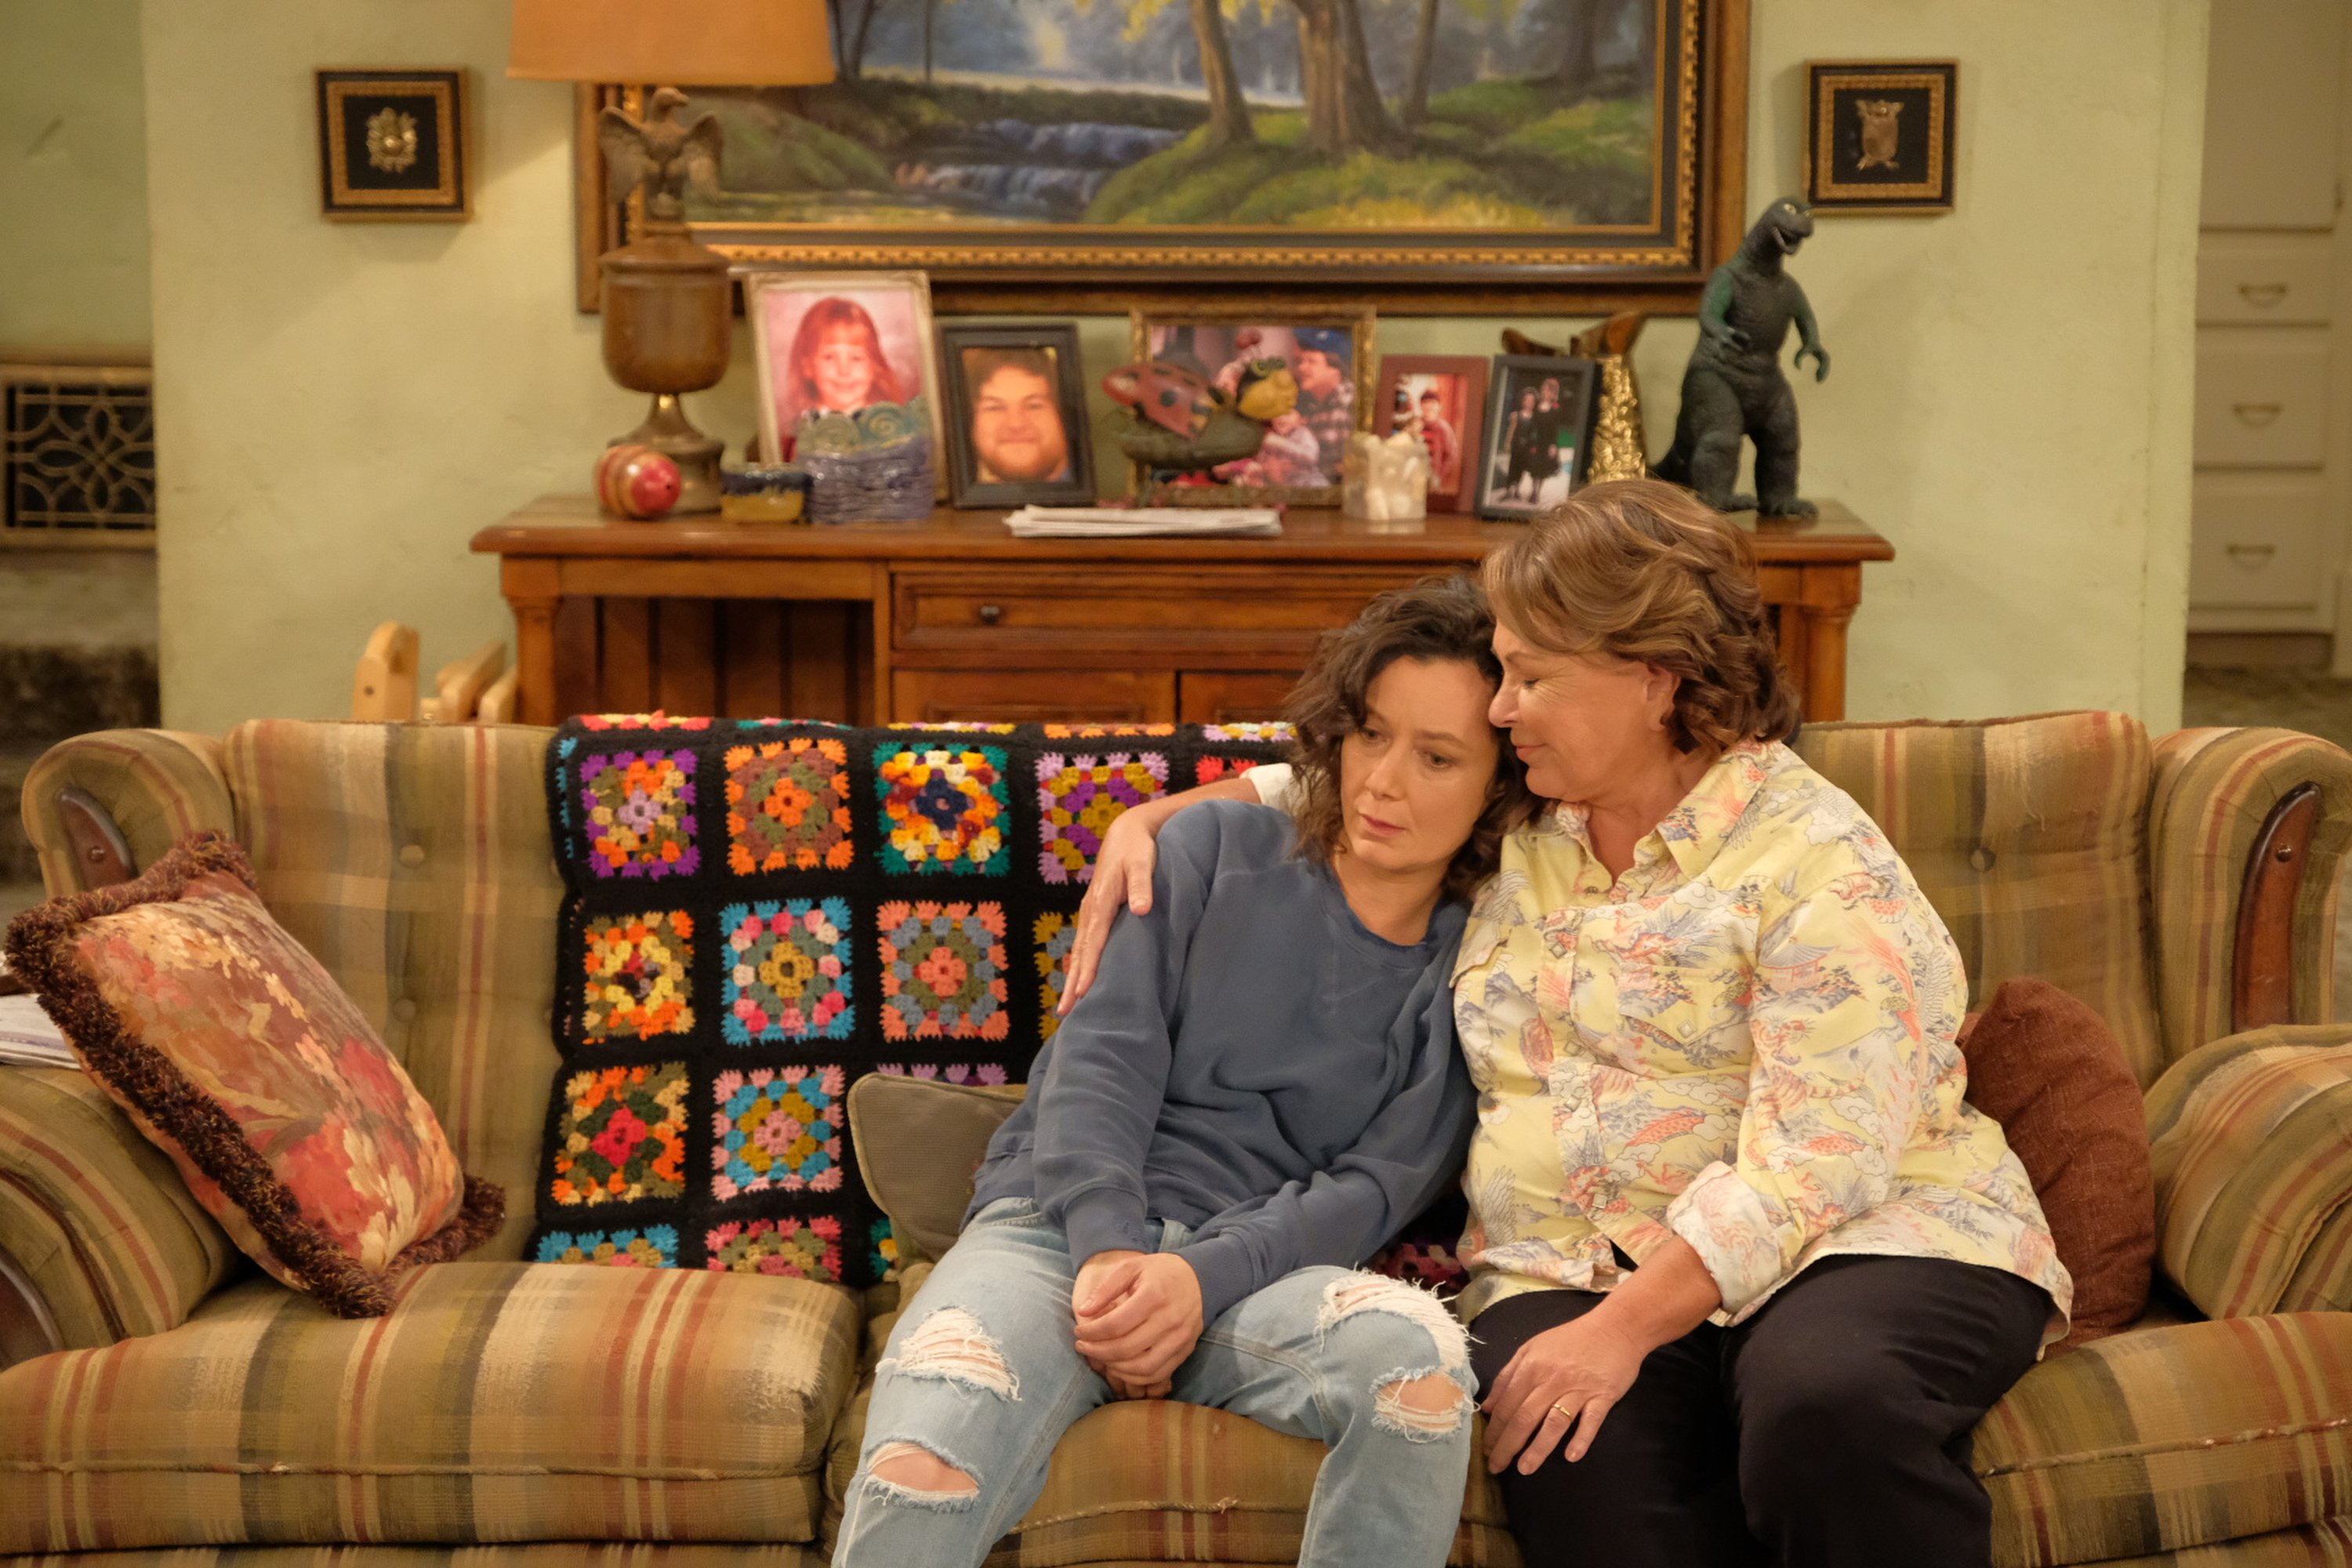 Roseanne Barr and Sara Gilbert in a scene from "Roseanne," circa 2017 | Source: Getty Images